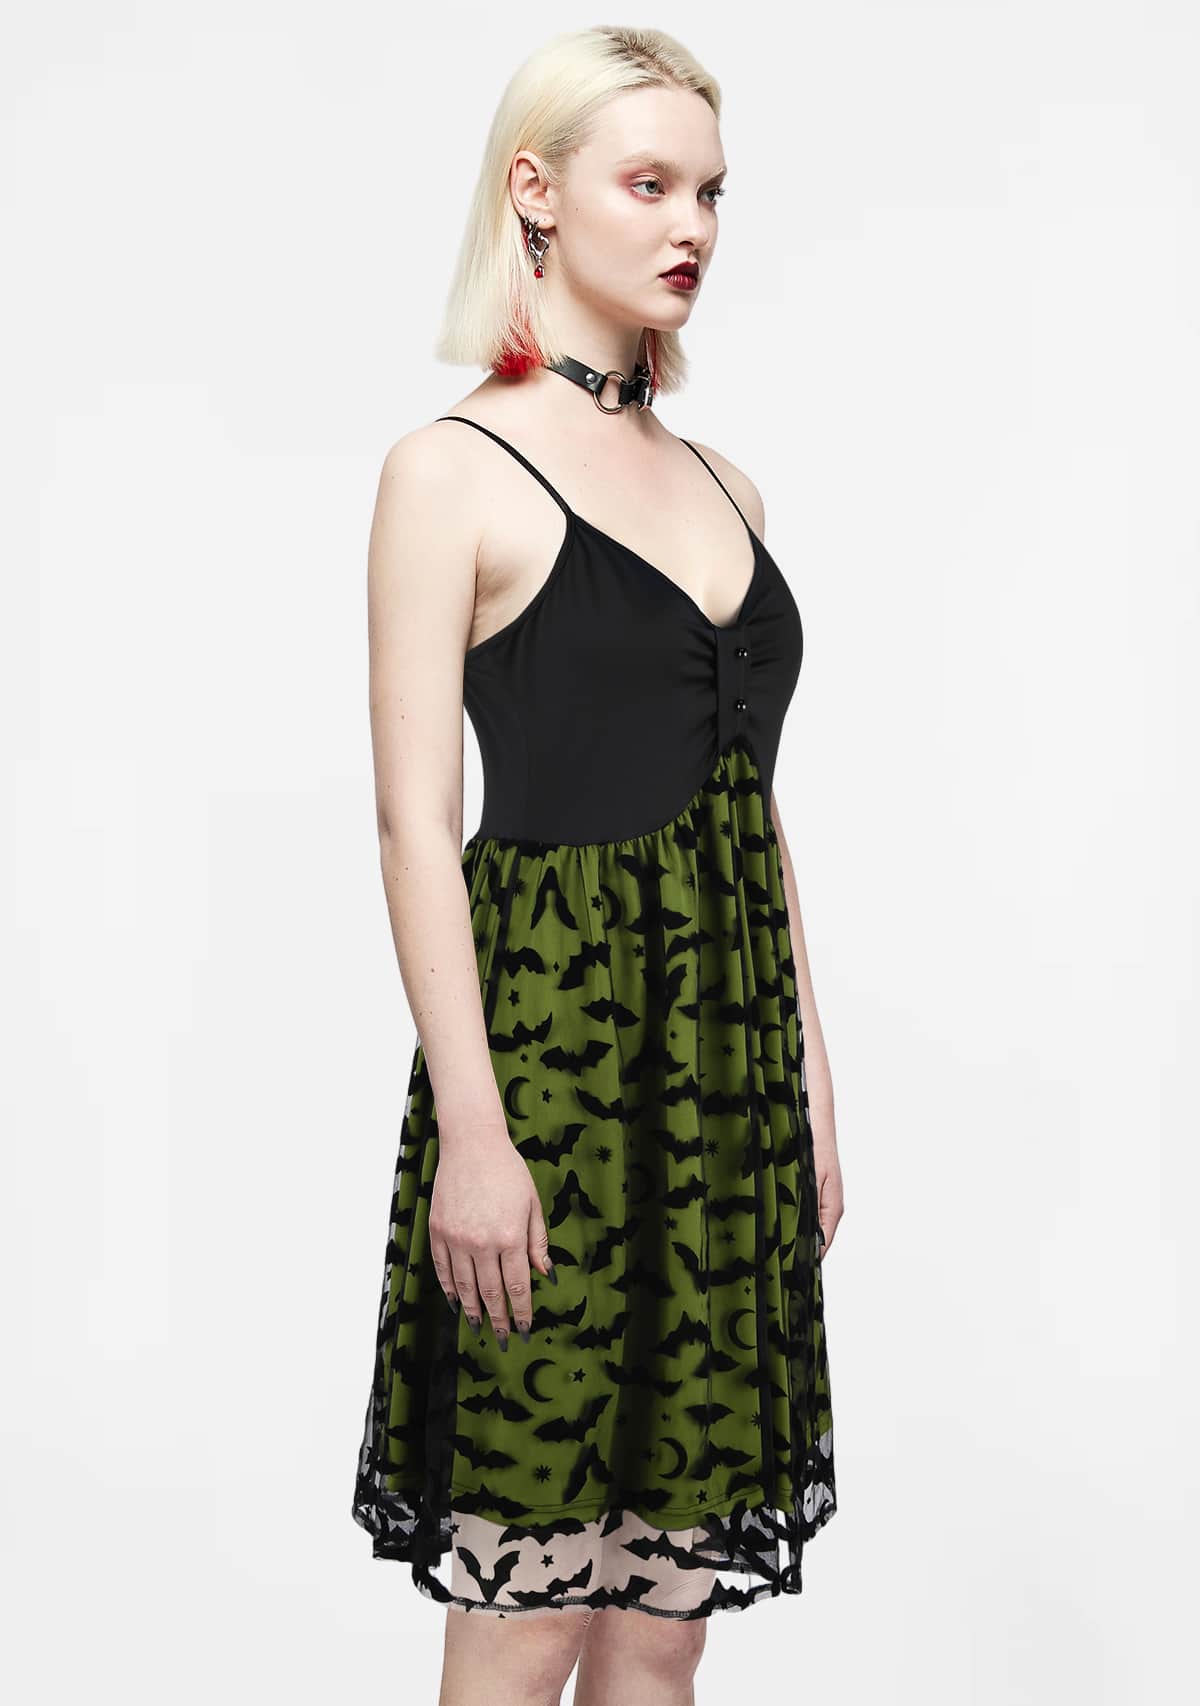 Gothic Enchantment Black and Green Lace Dress